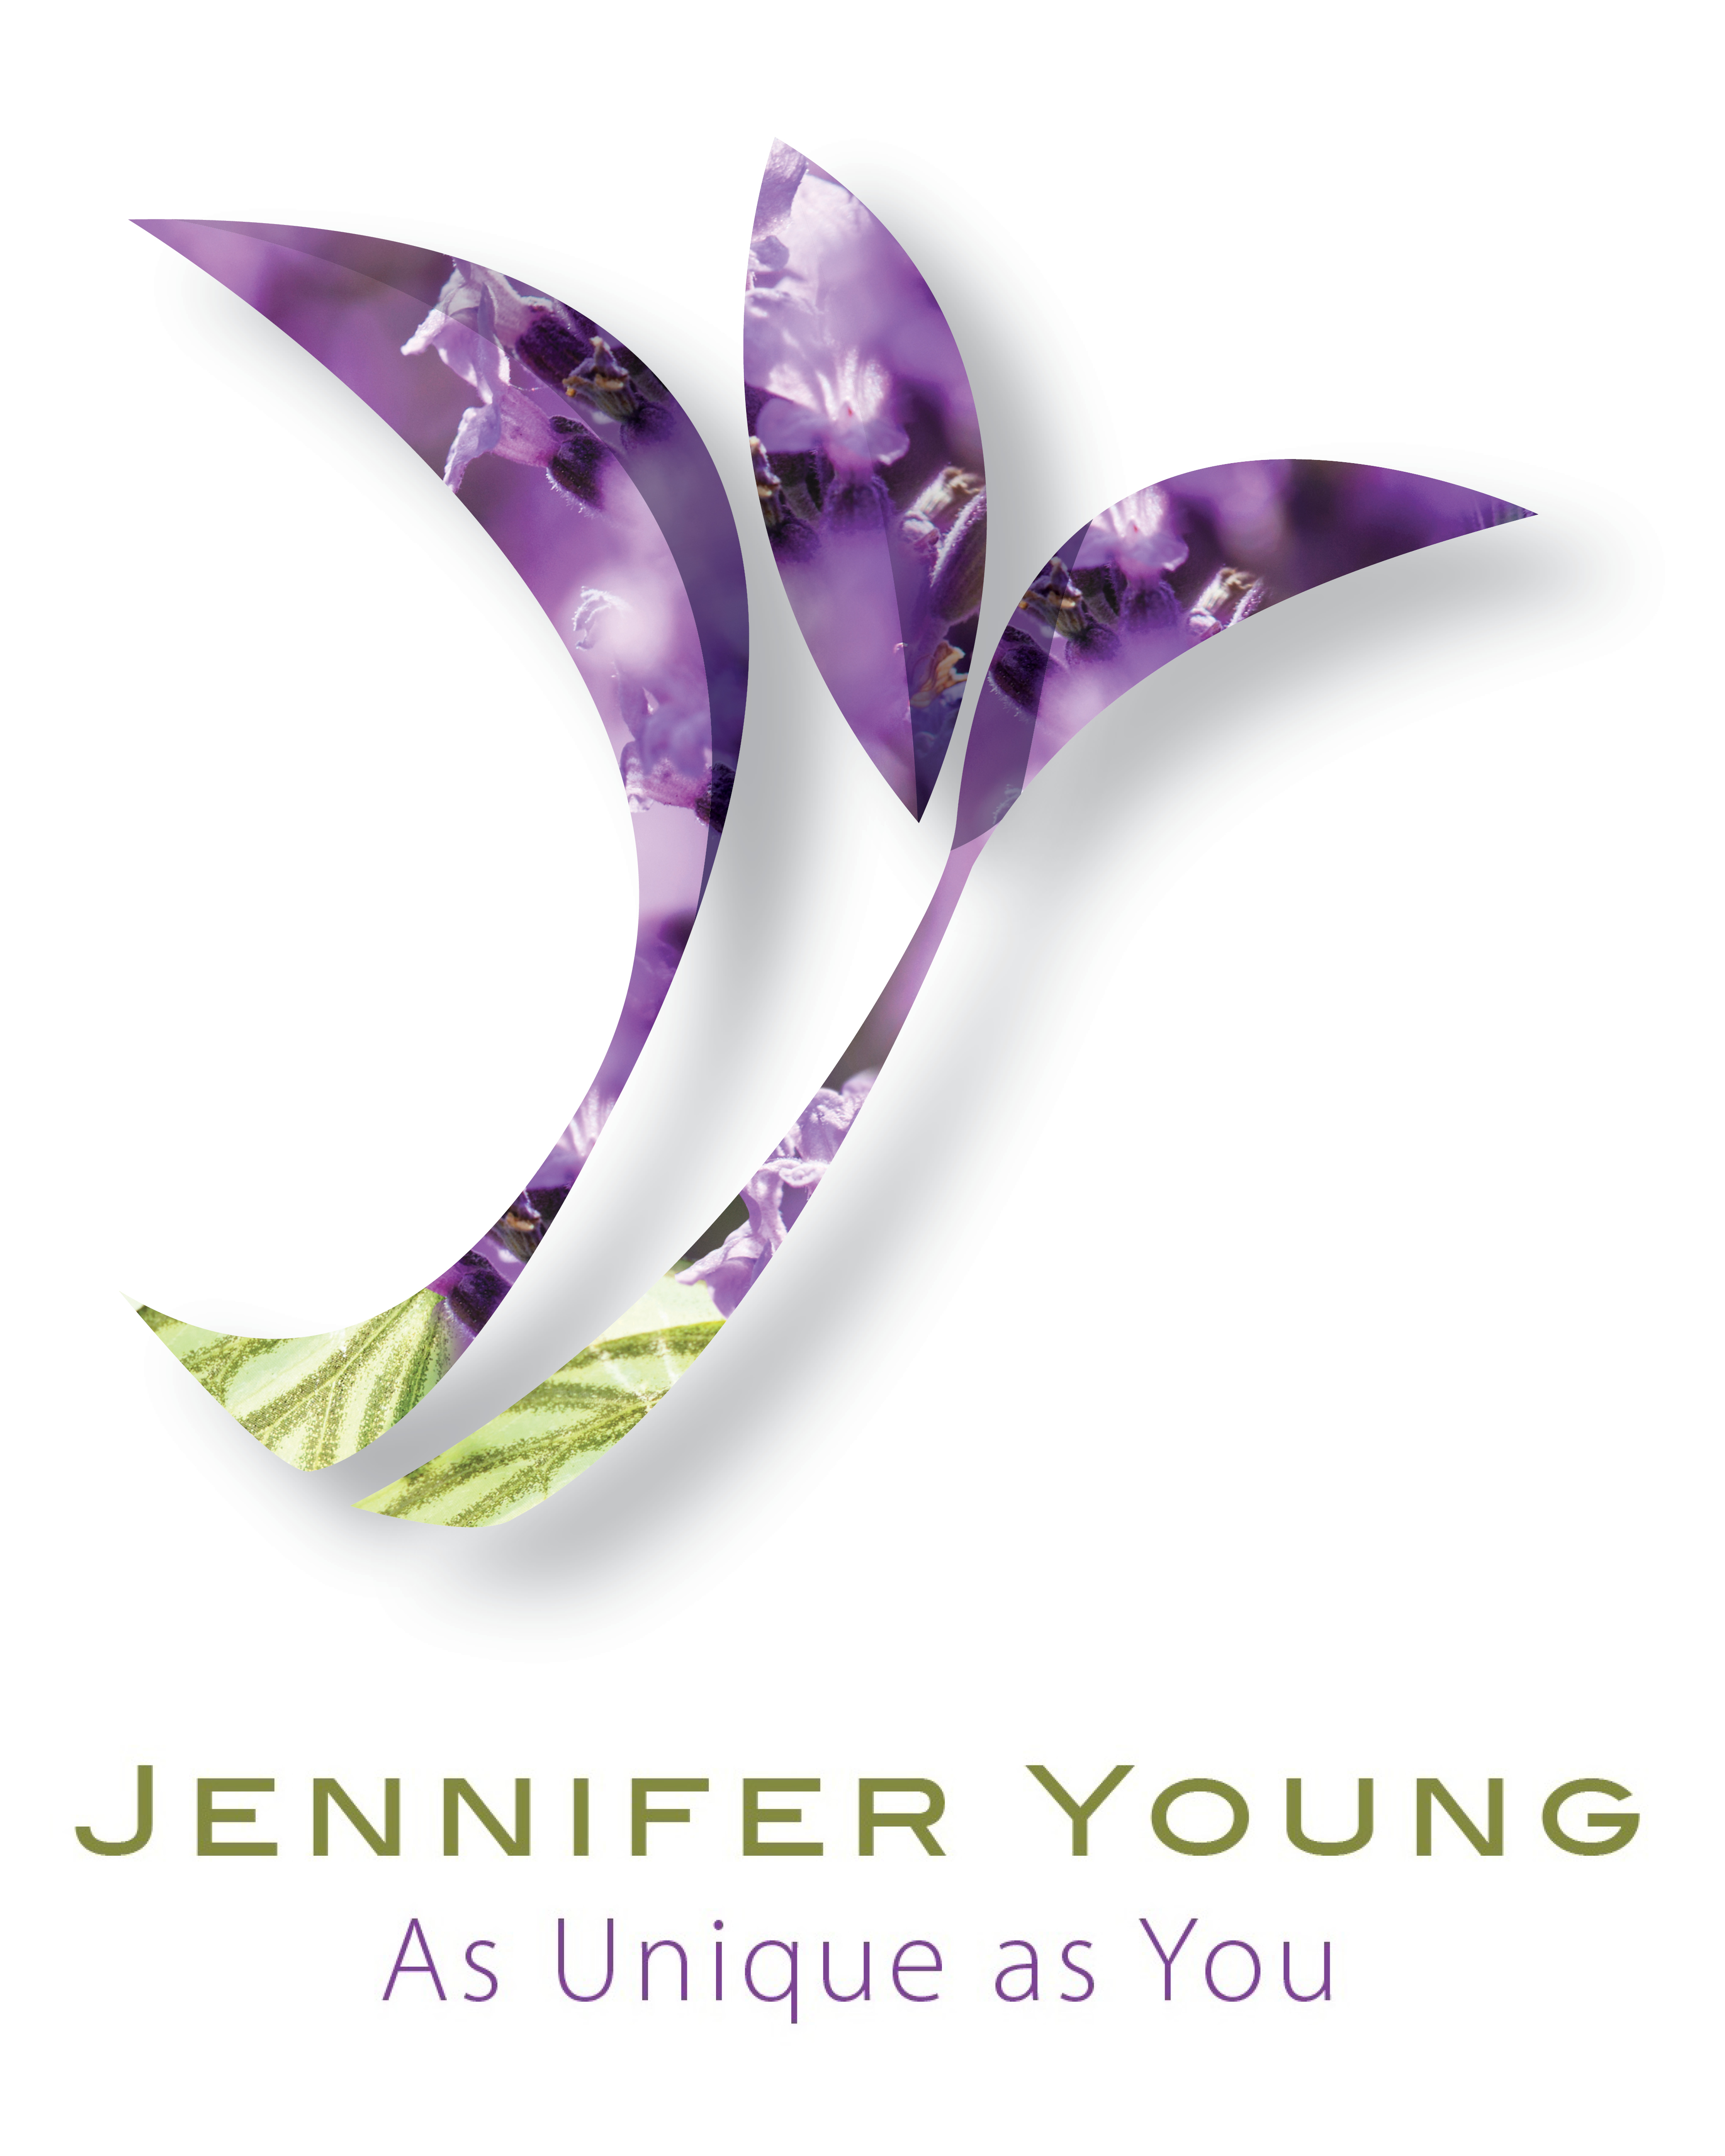 Jennifer Young as unique as you